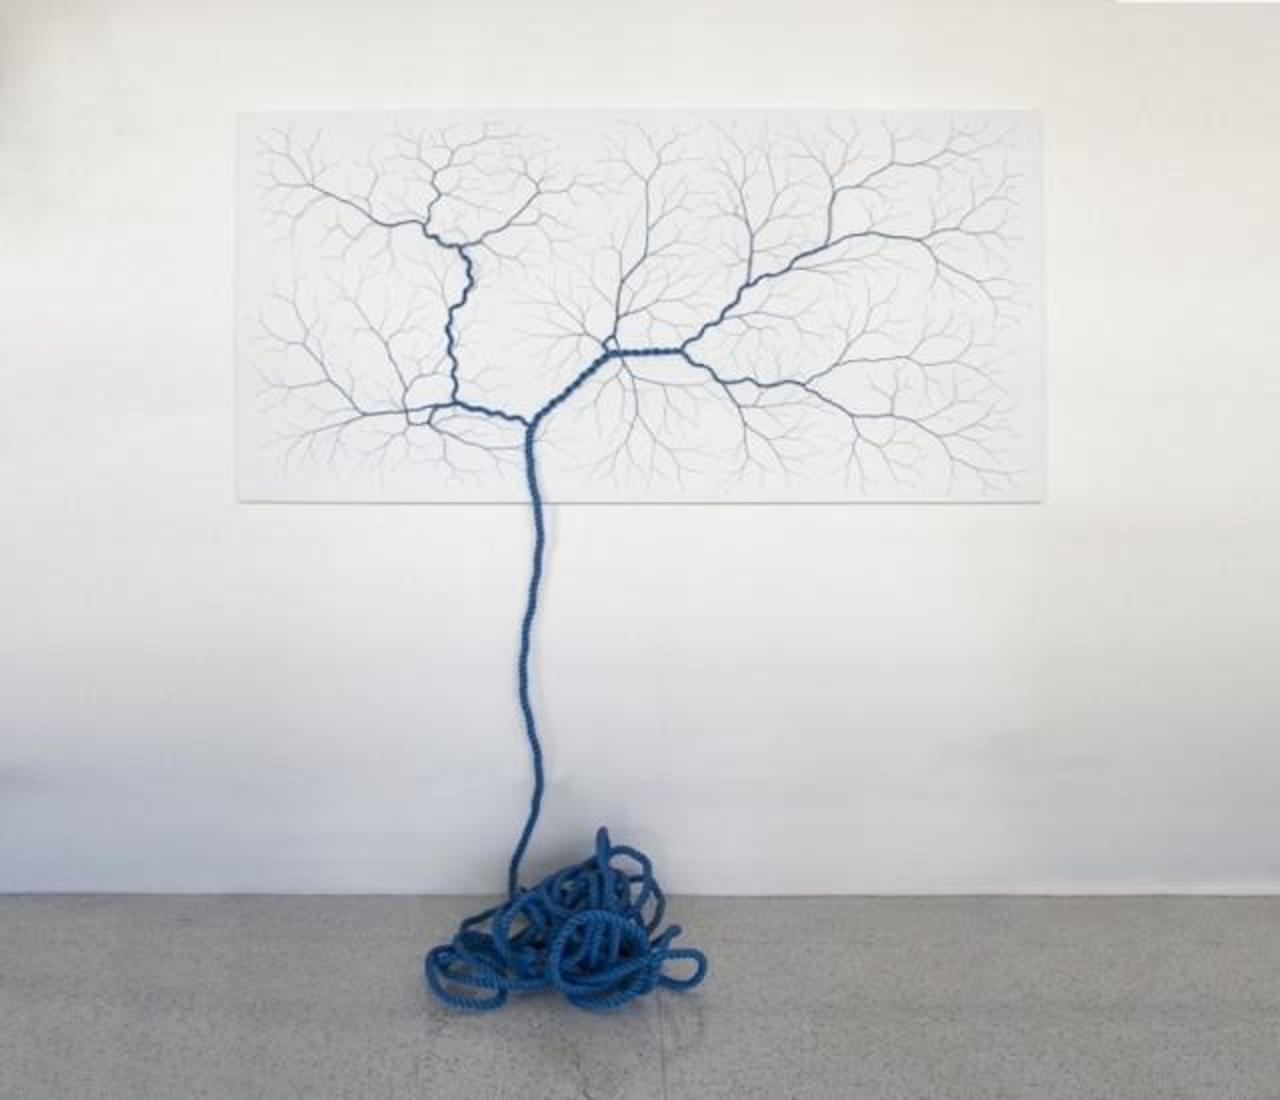 Ropes Turning into Trees Installations #art #photo #design http://t.co/SCA3YWQJHE